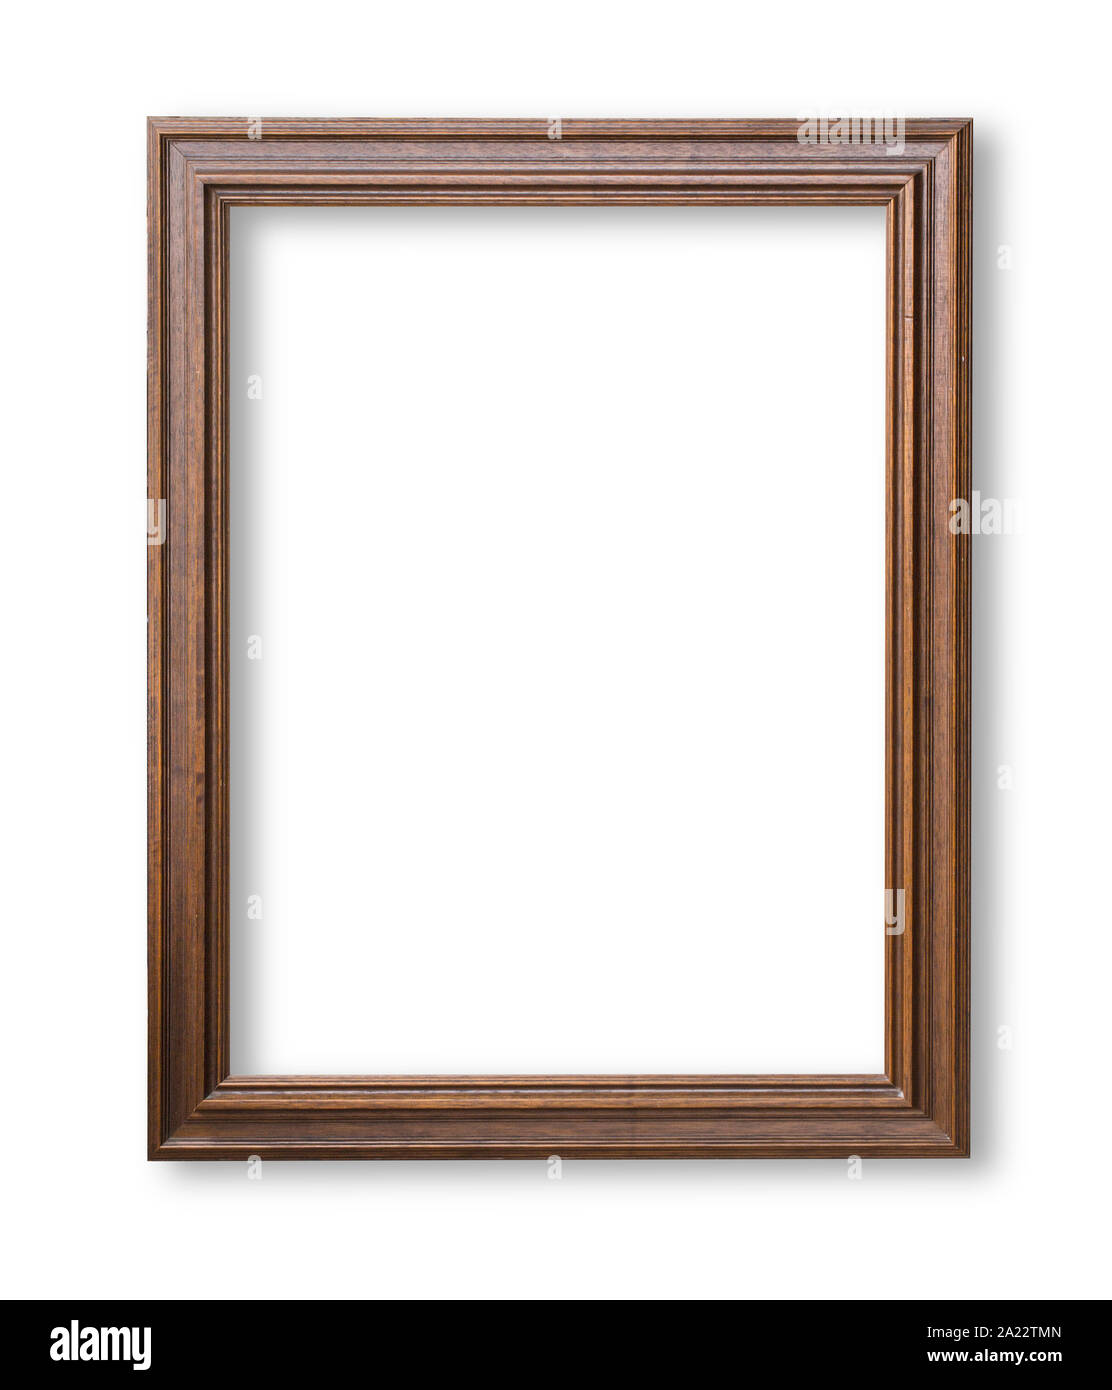 Wooden frame for paintings or photographs isolated with clipping path Stock Photo